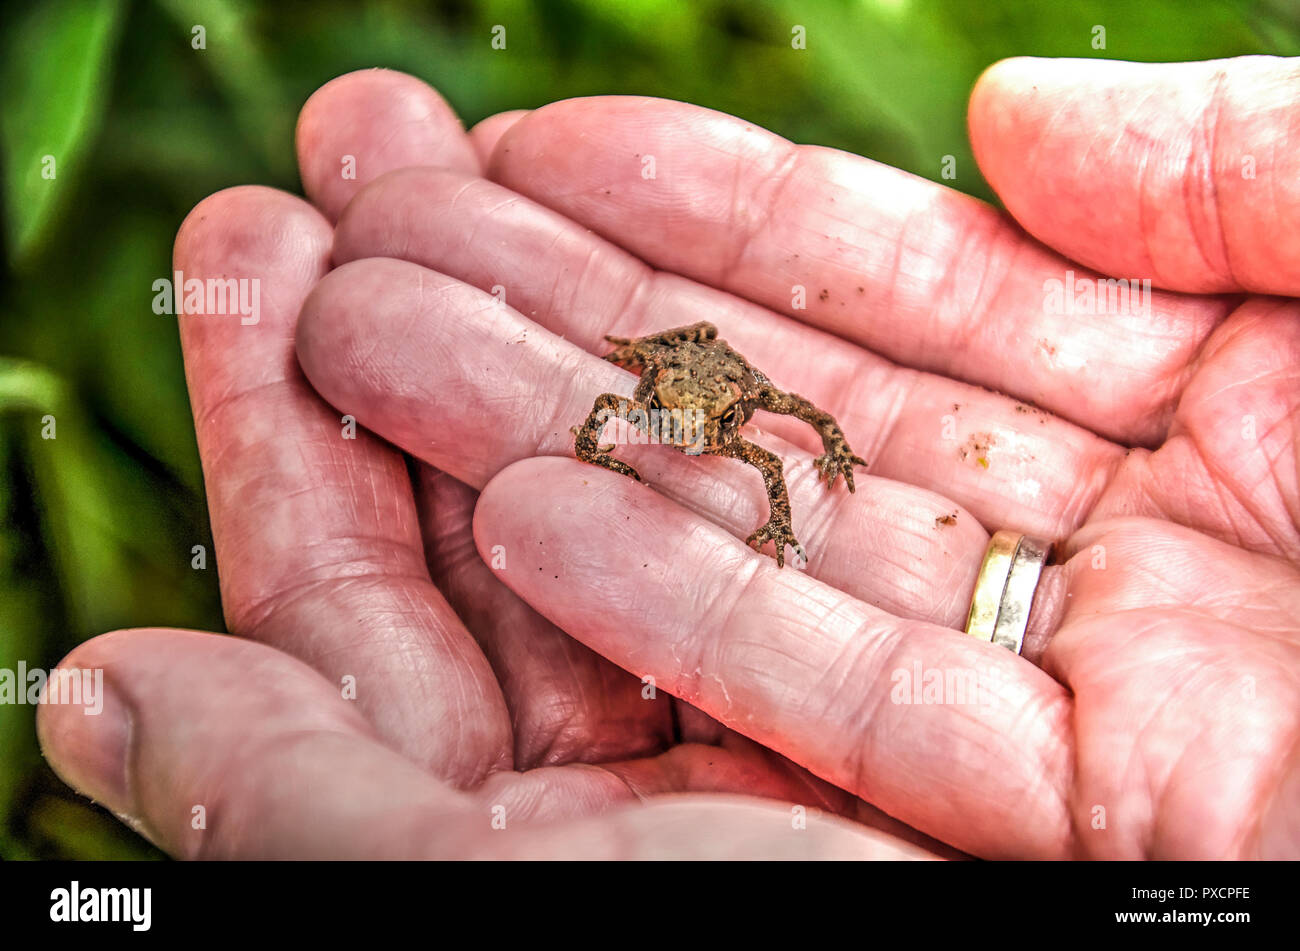 A tiny frog on a woman's hands Stock Photo